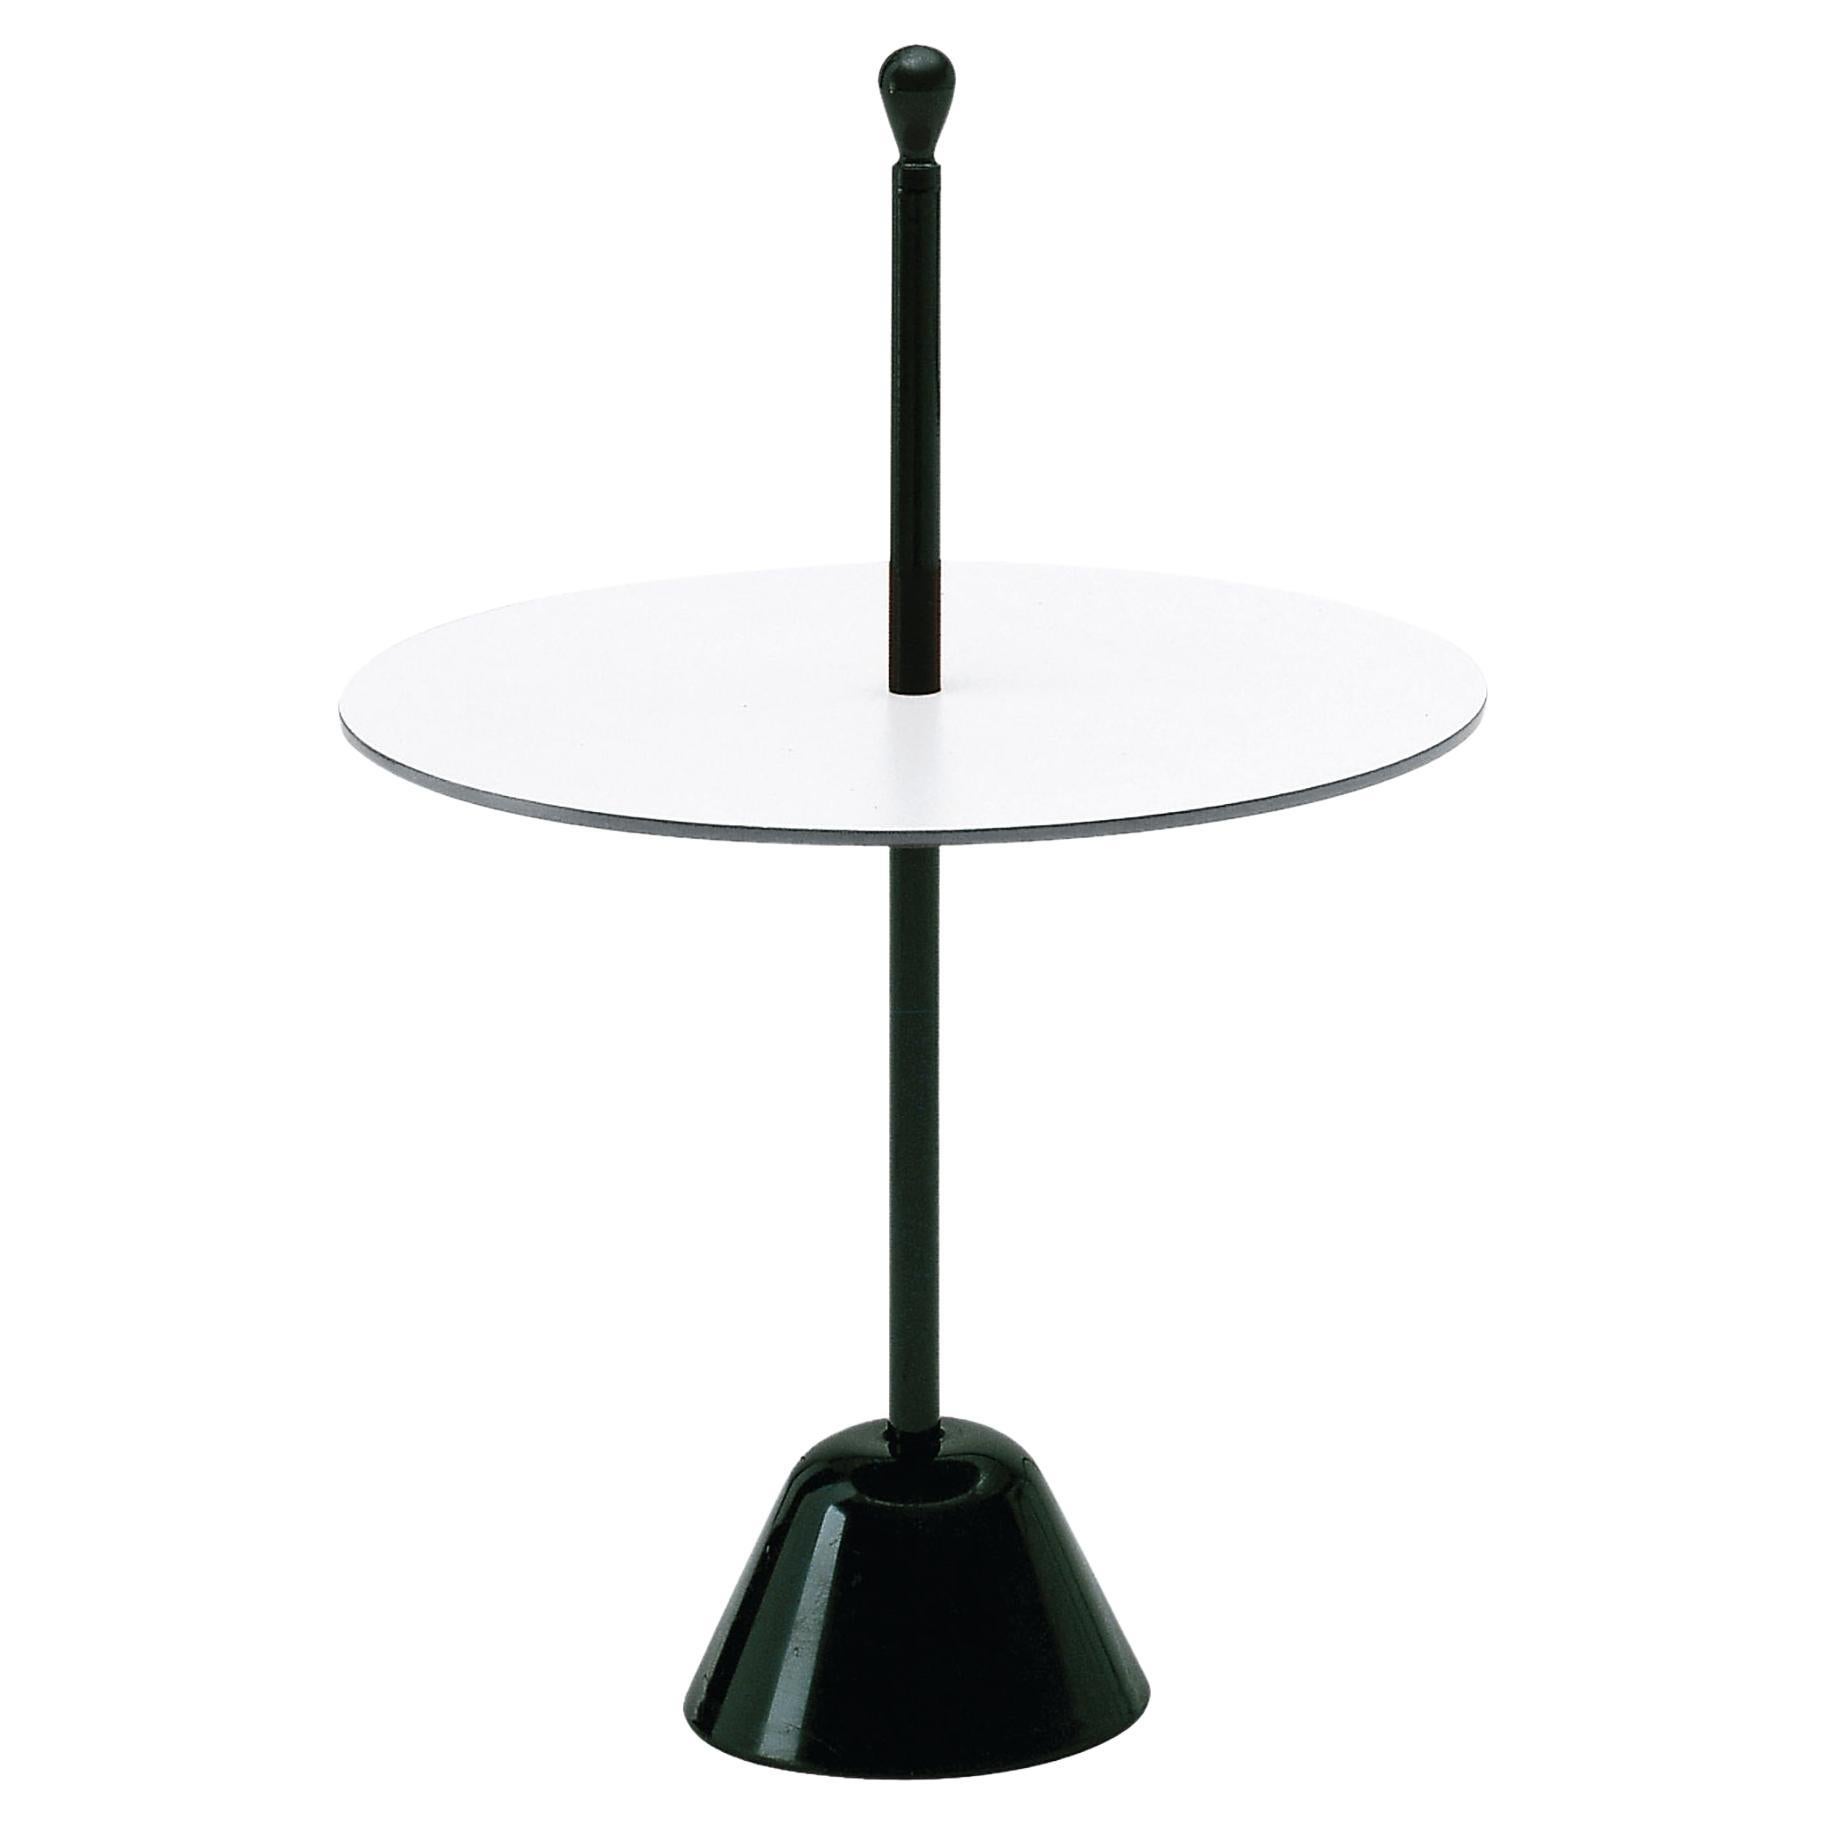 Zanotta Servomuto Low Table in White Top with Black Steel Frame